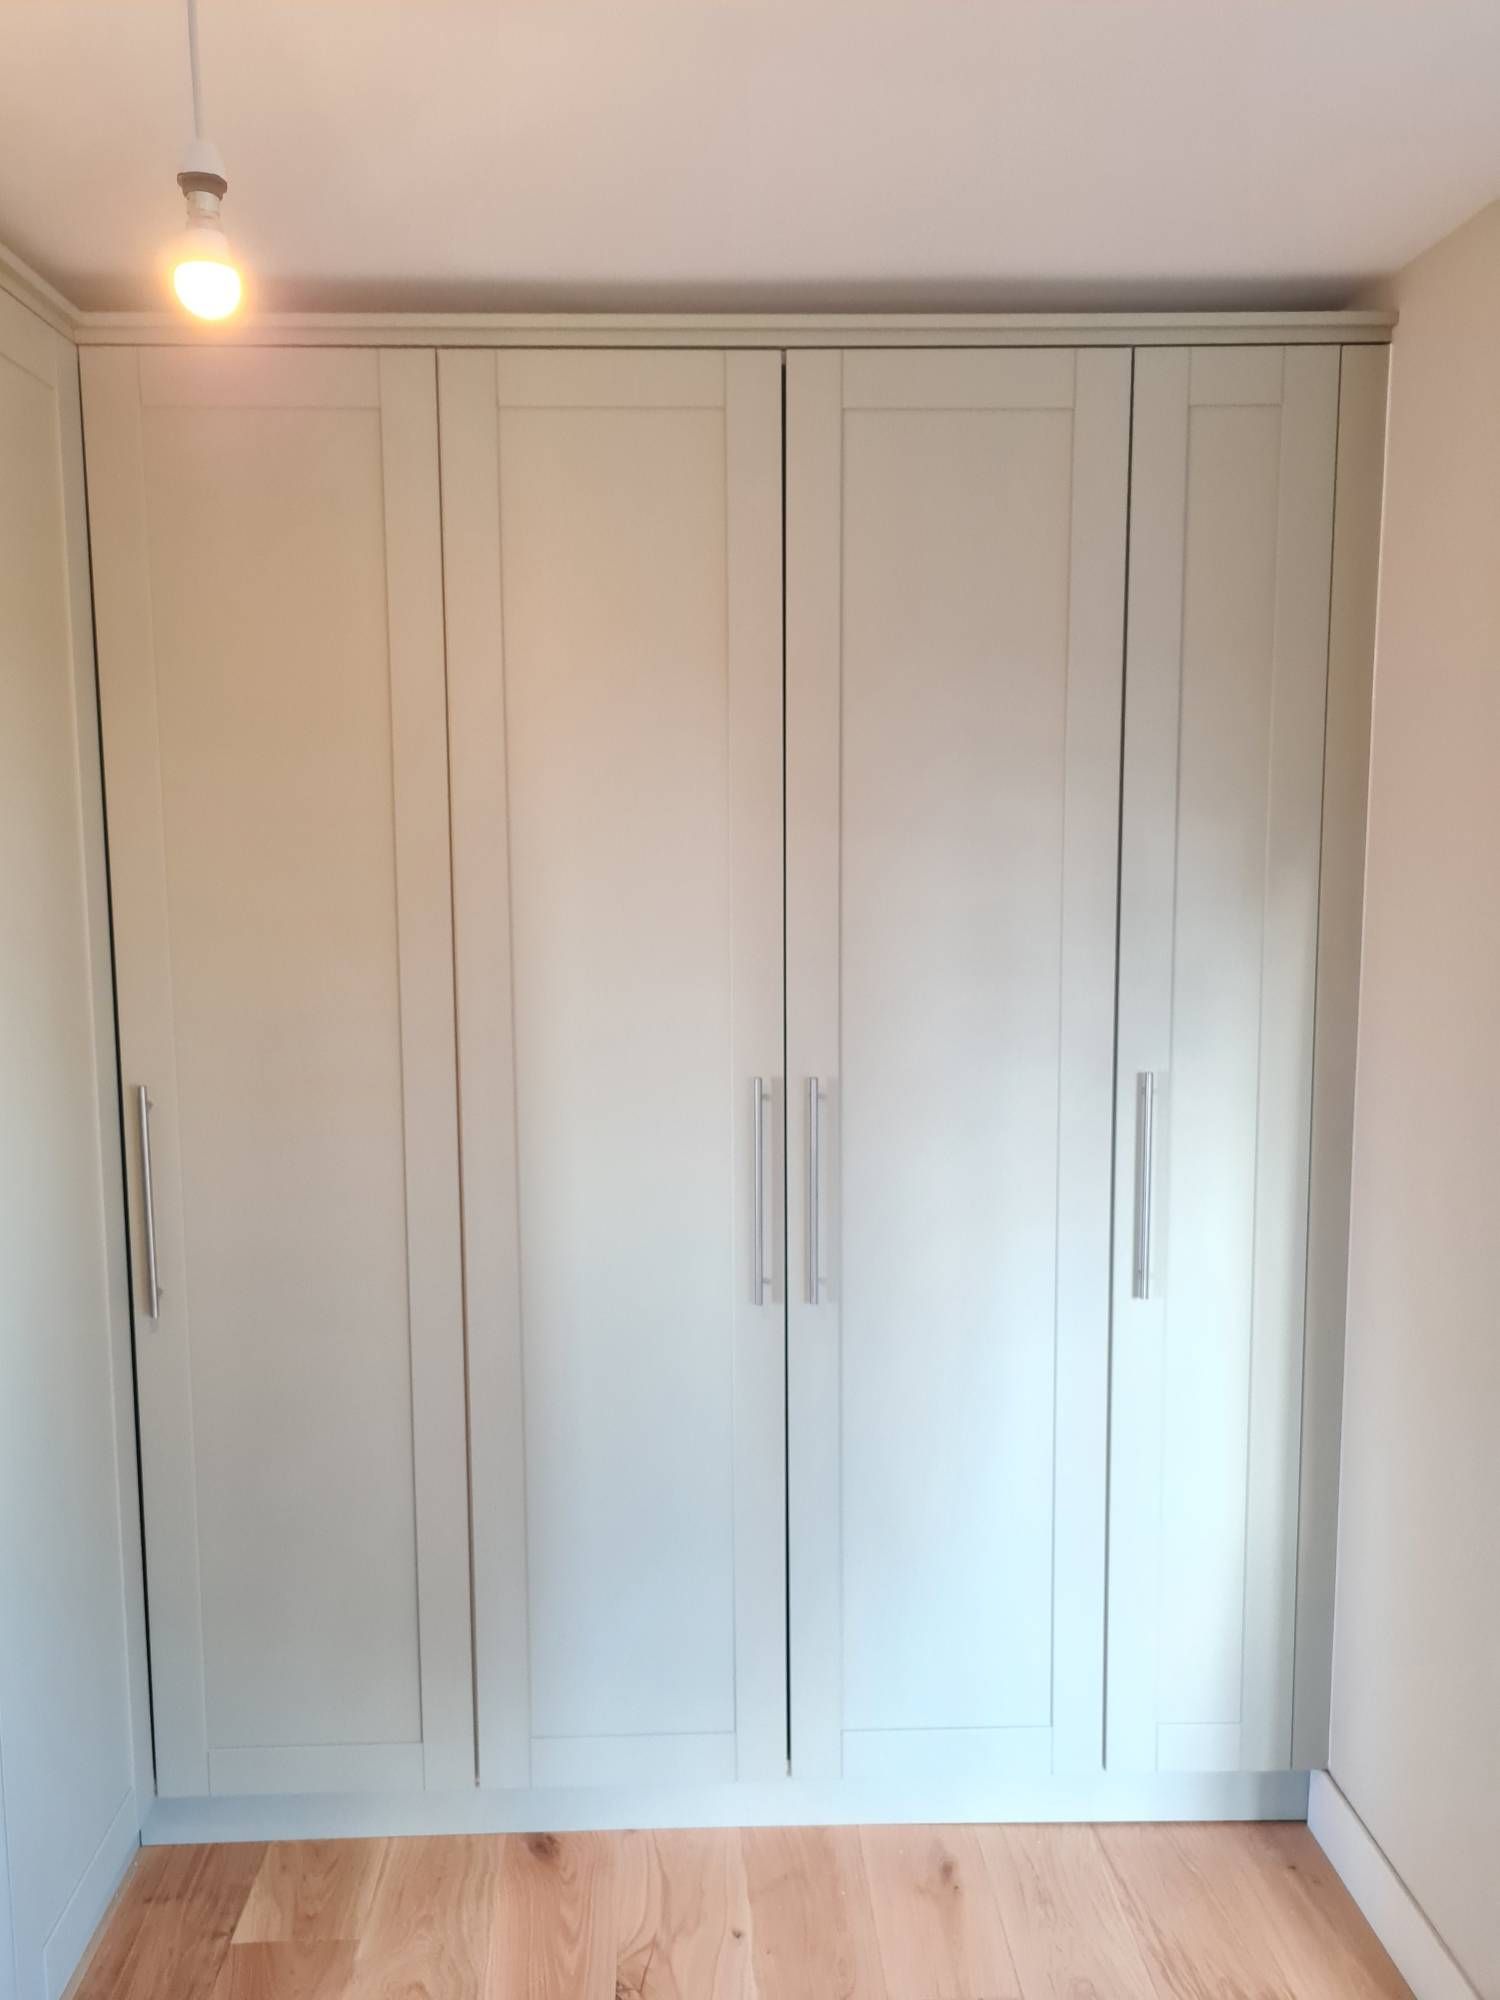 Carpentry & Kitchens In Maidstone Kent /wardrobes/decking Within Farrow And Ball Painted Wardrobes (View 15 of 15)